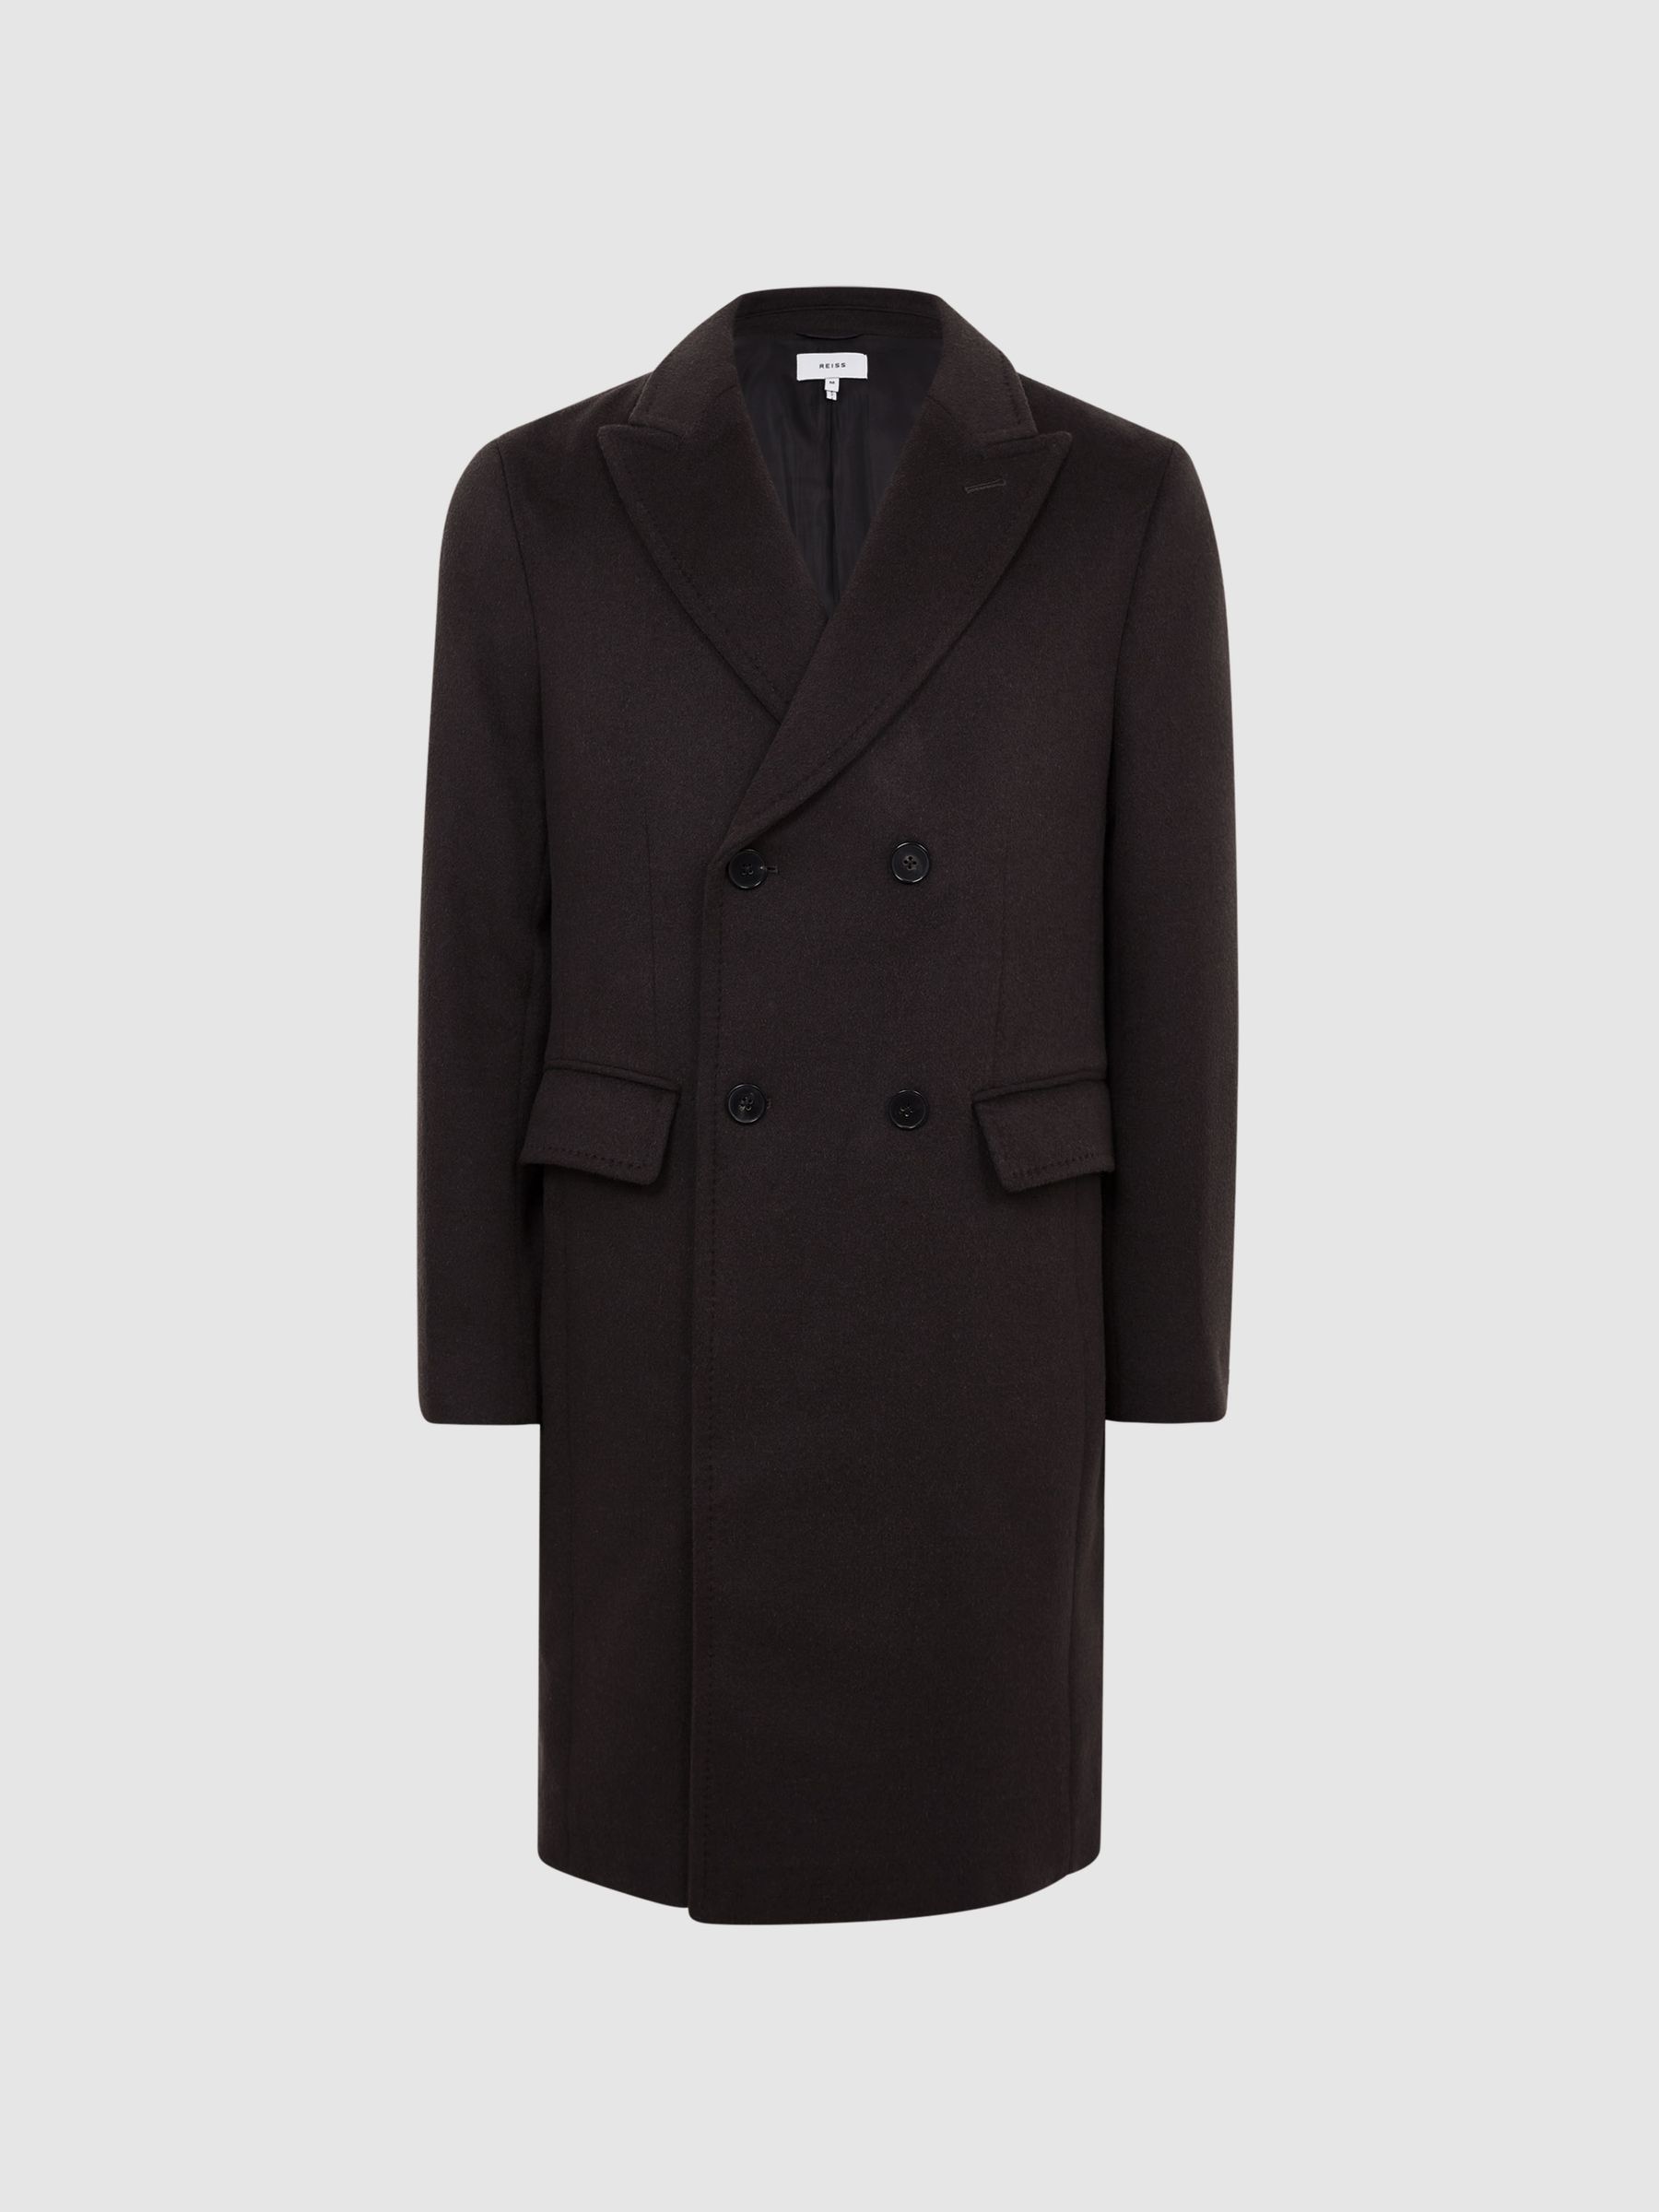 Reiss Glazier Double Breasted Wool Mid Length Overcoat - REISS